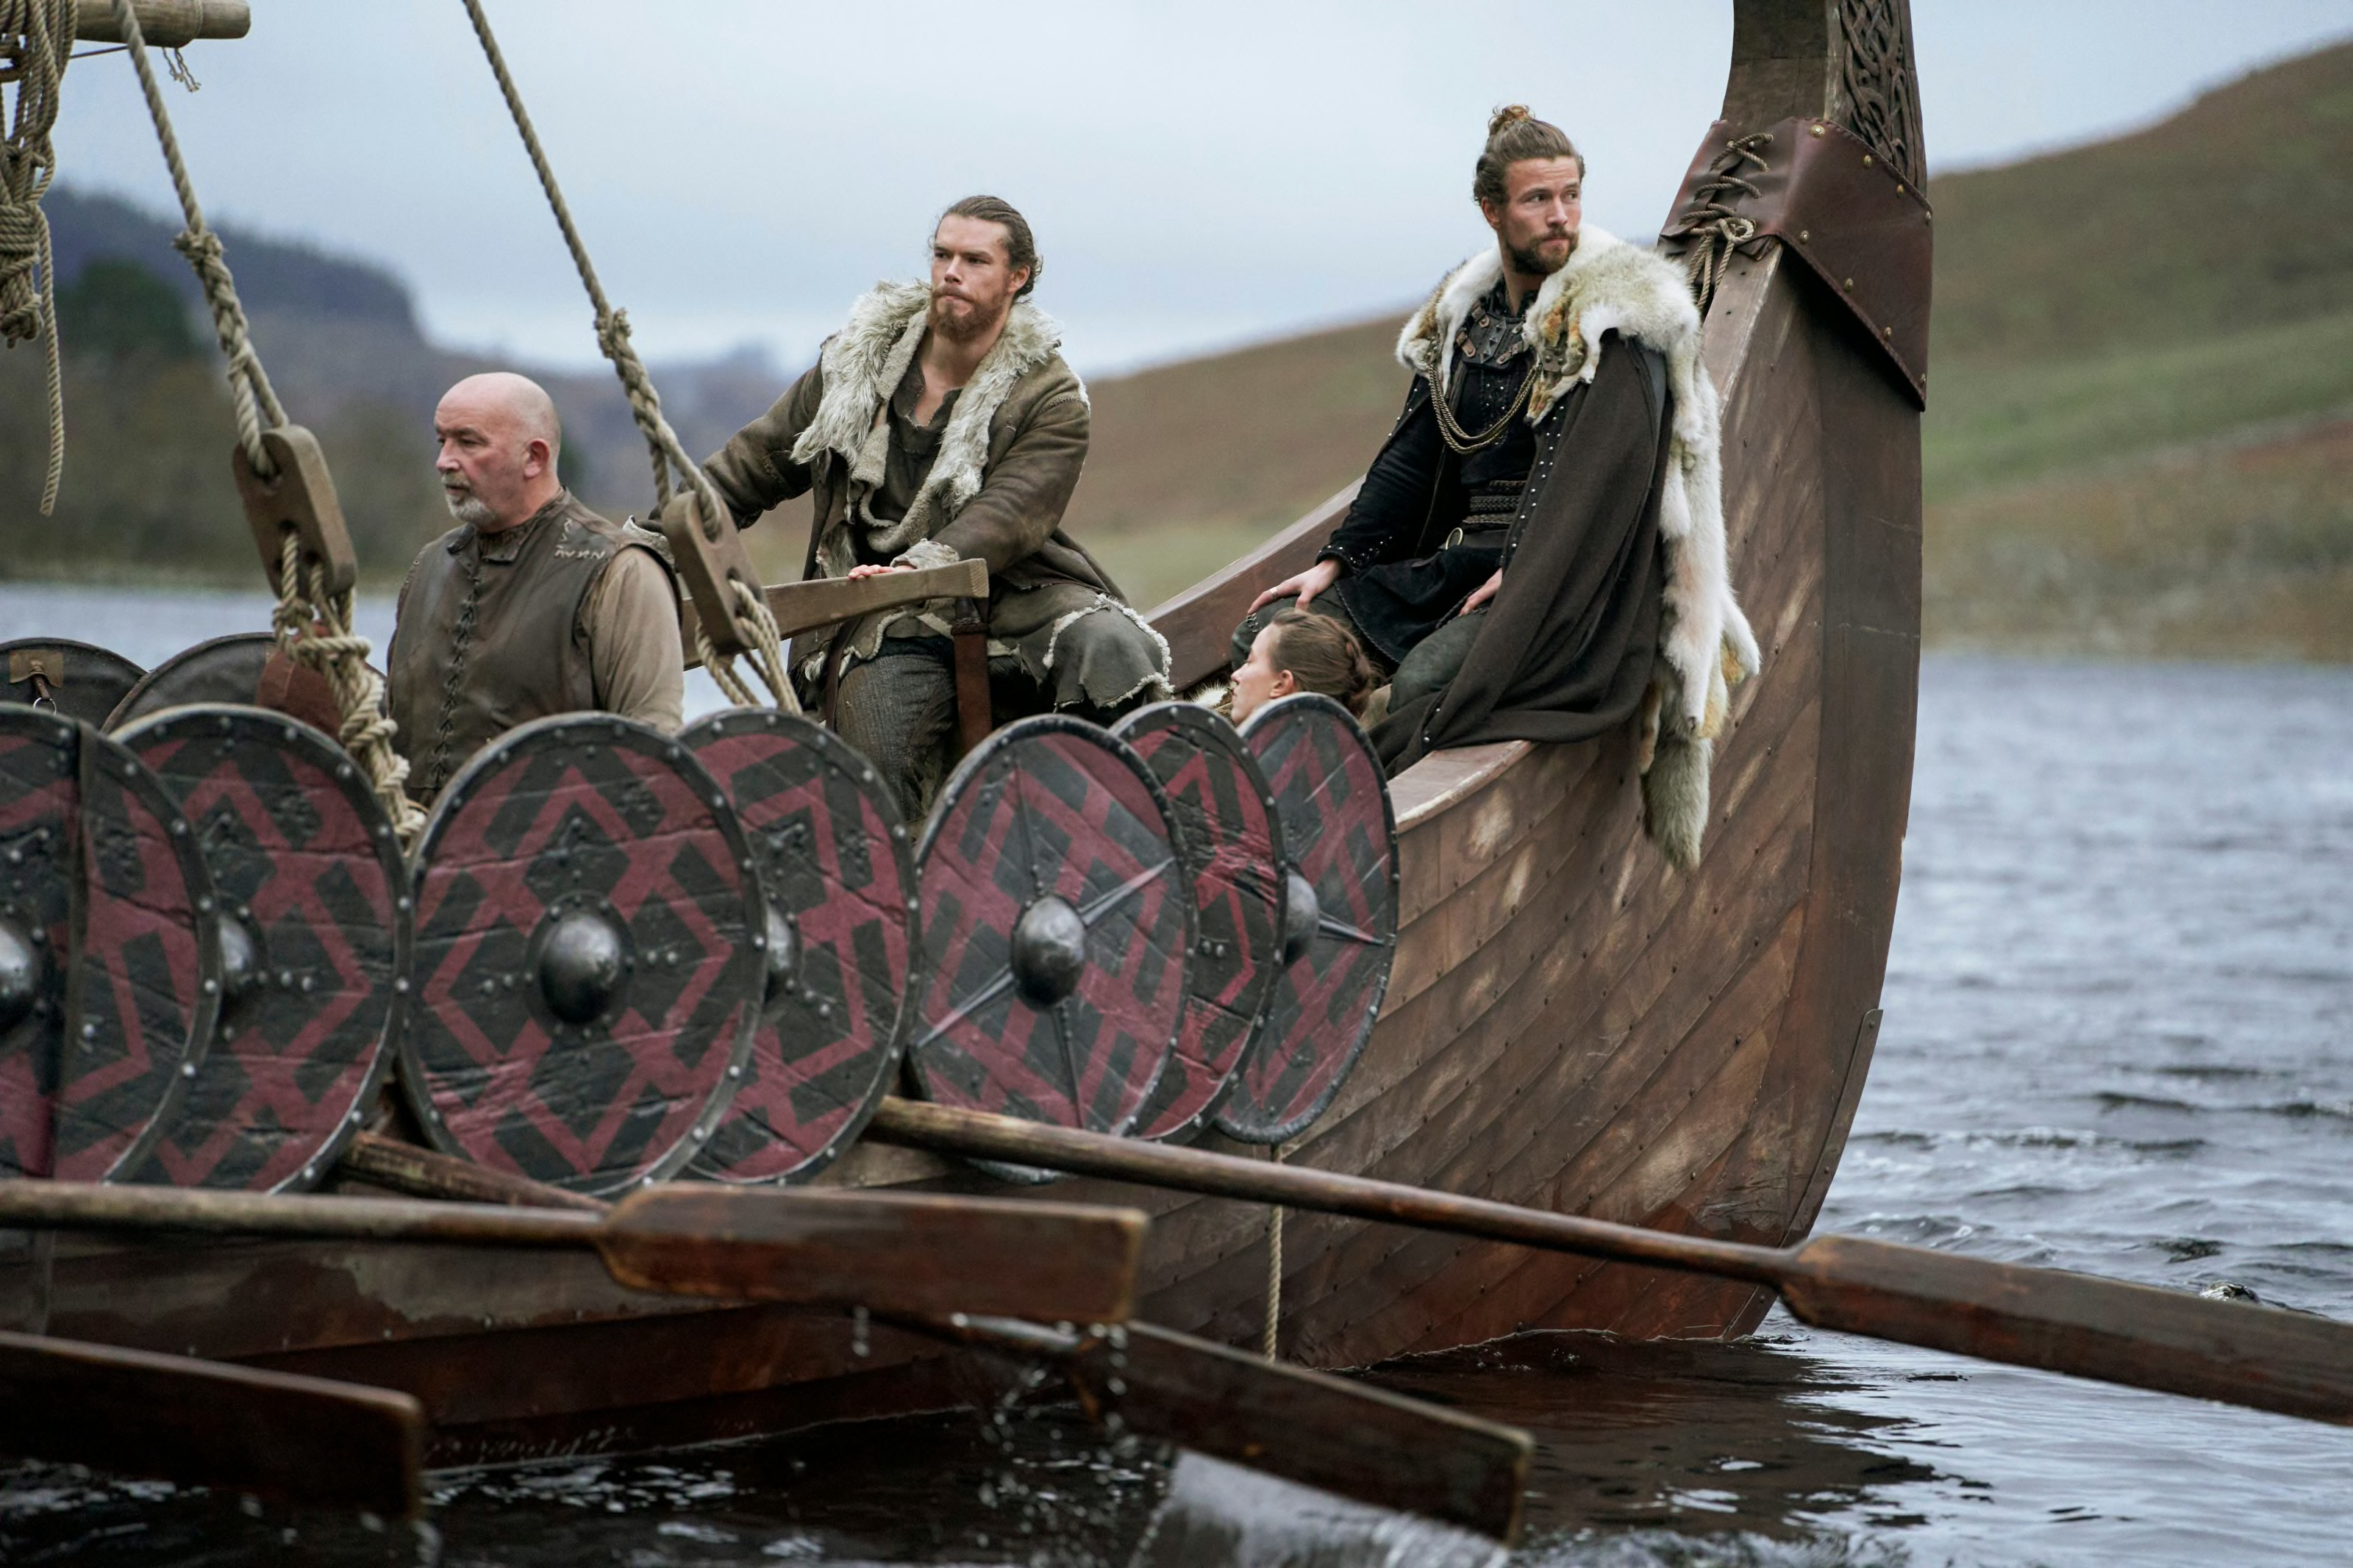 King Canute & Queen Emma  power over me (Vikings Valhalla) 